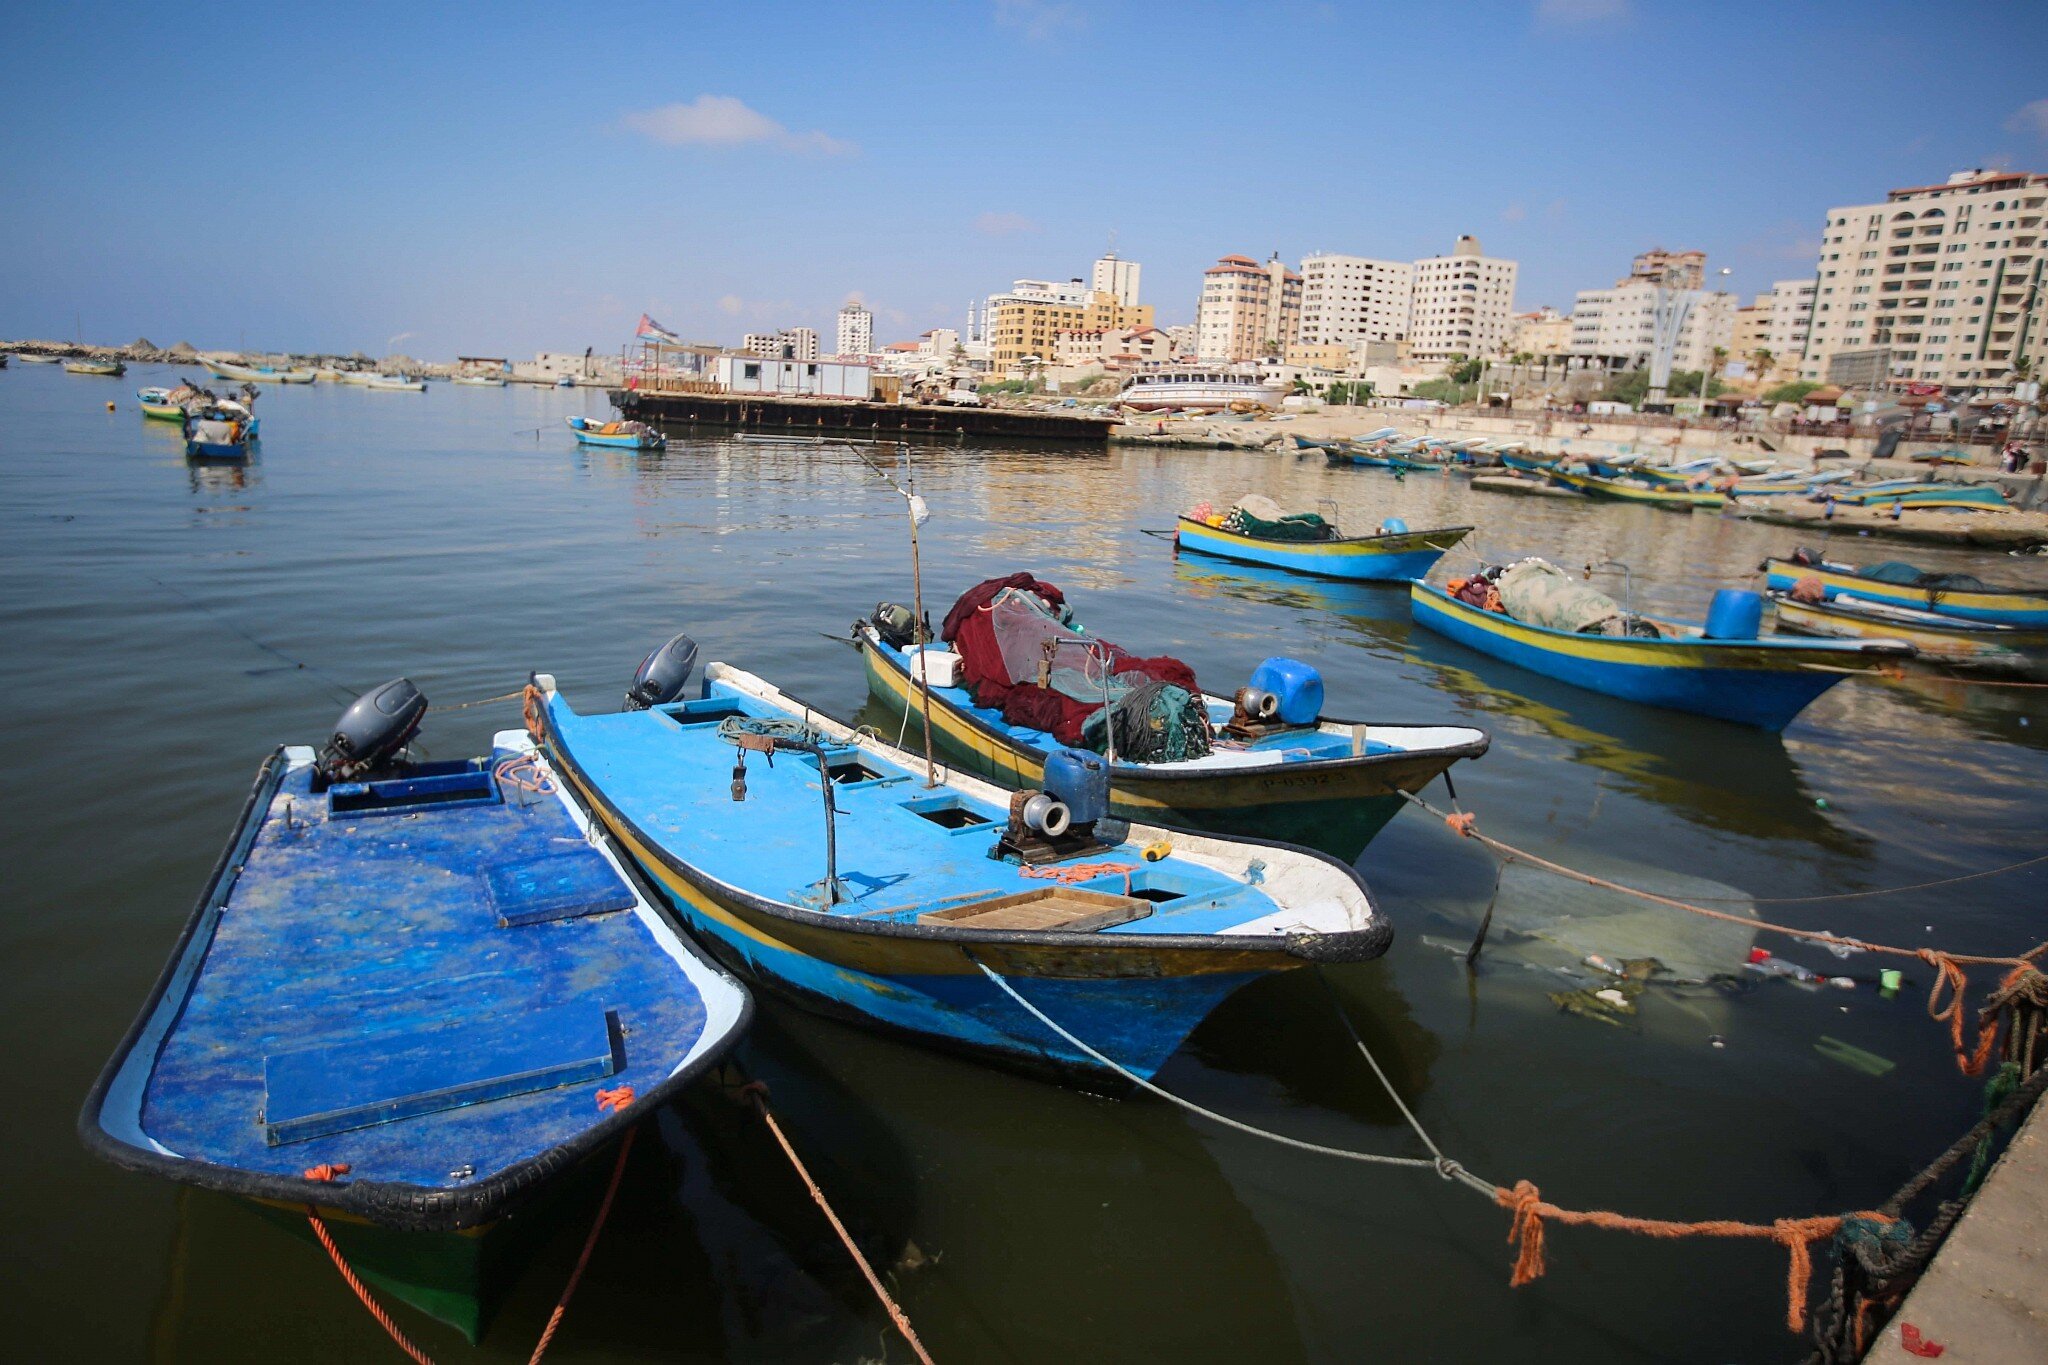 Fishing boats docked at the port of Gaza City, June 13, 2019. (Hassan Jedi/Flash90).